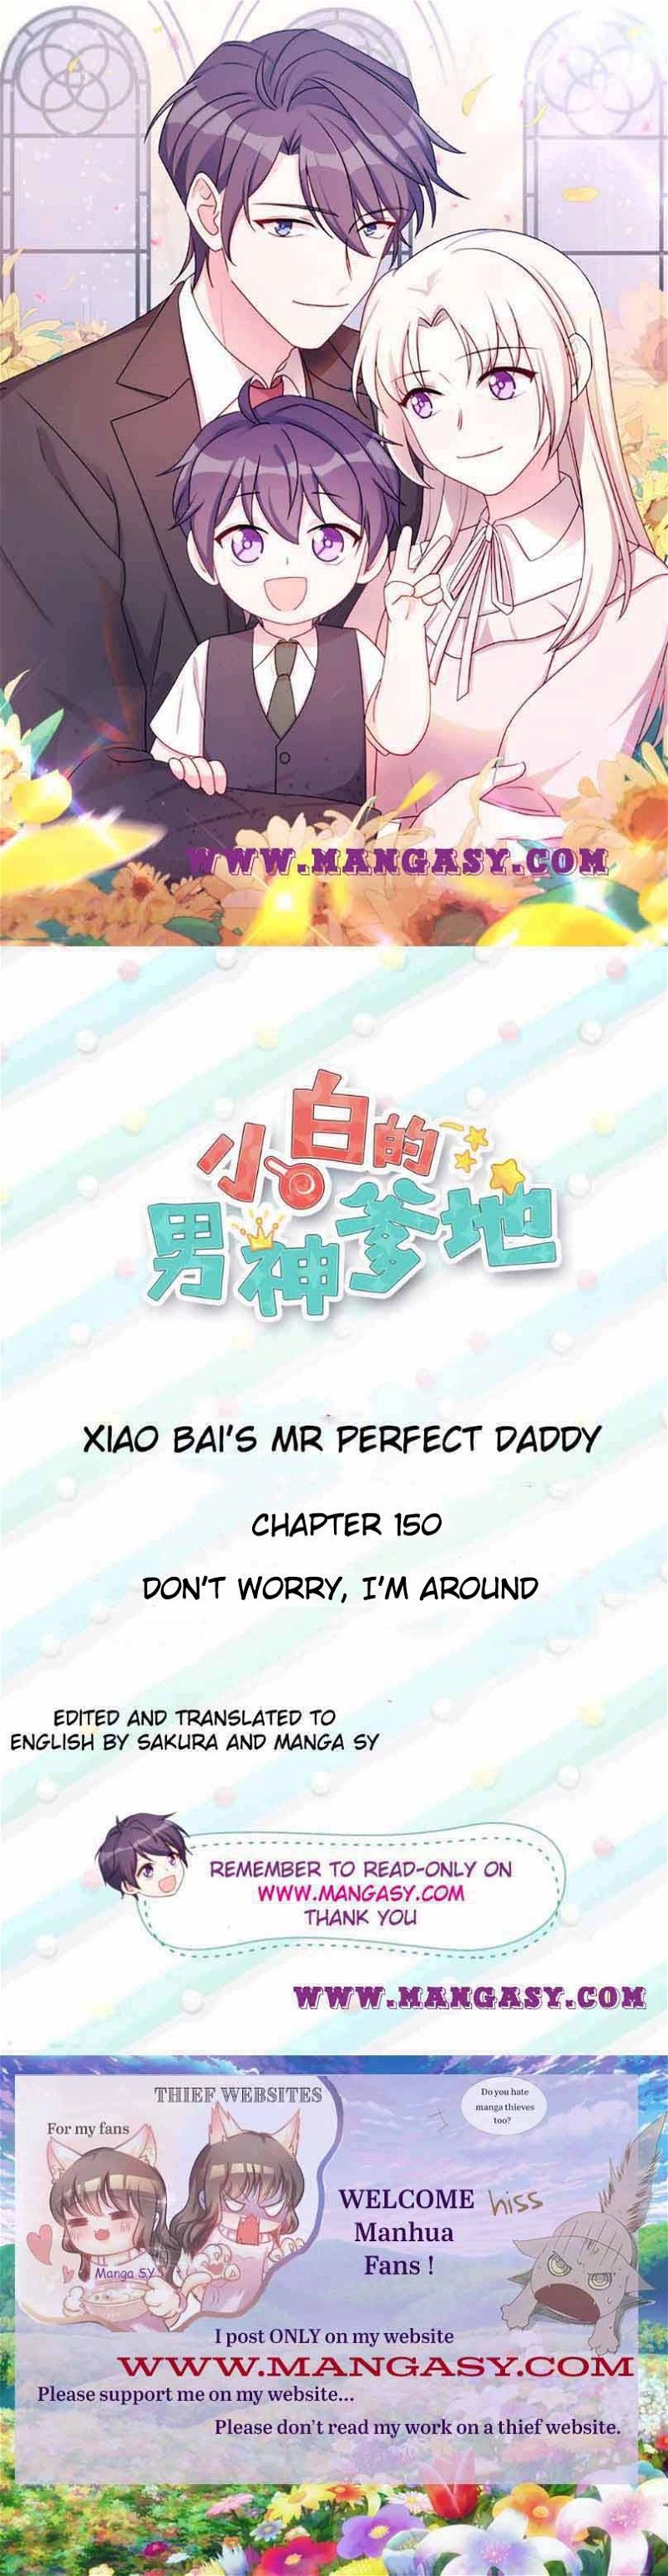 Xiao Bai’s father is a wonderful person Chapter 150 - Page 0